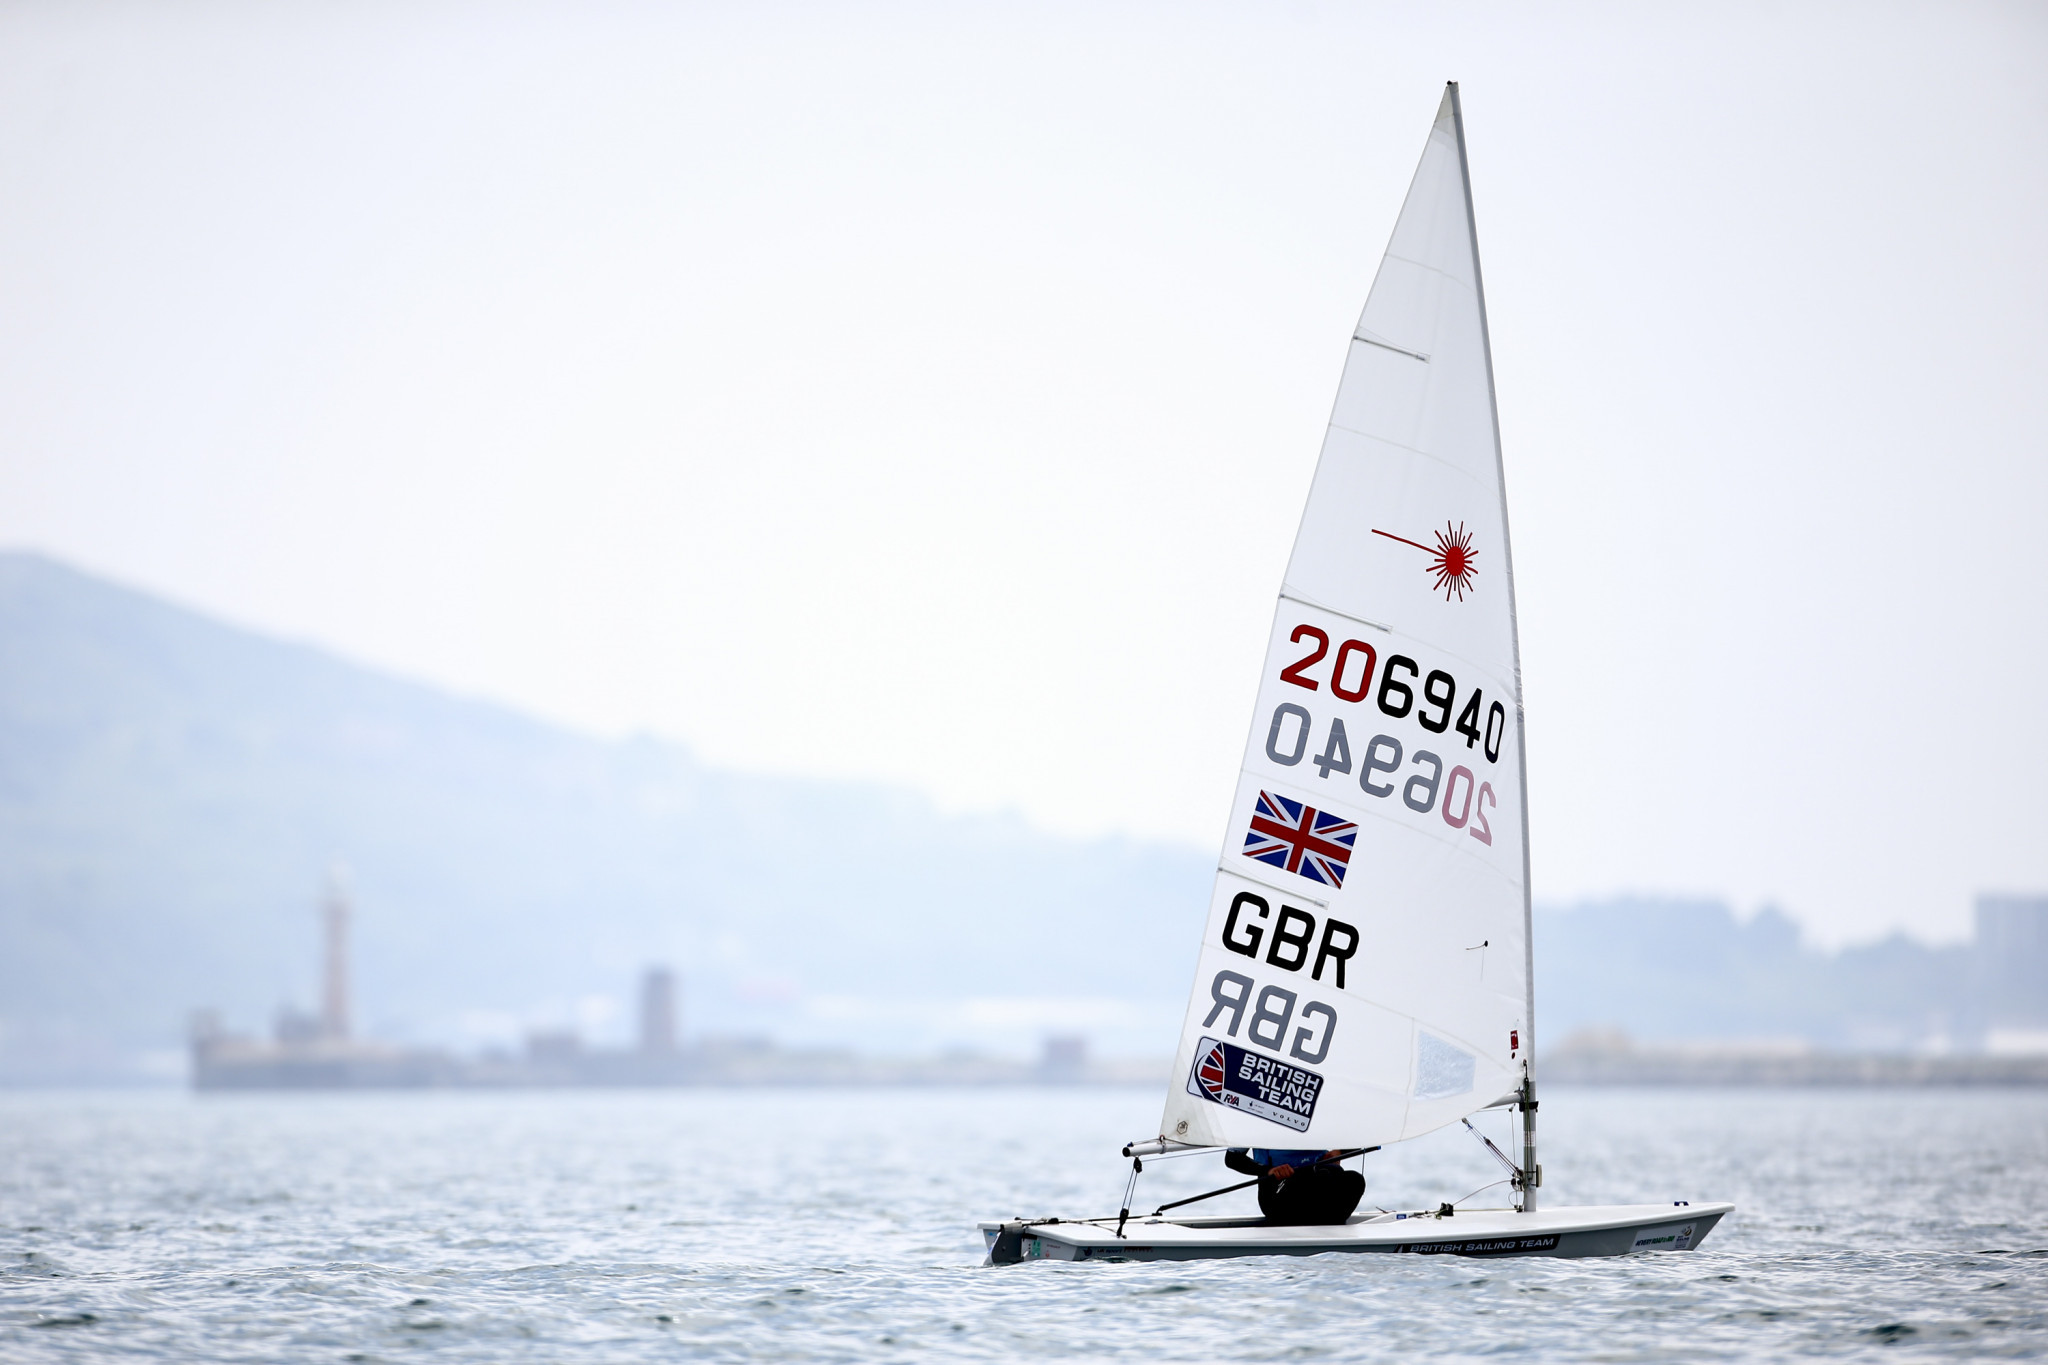 Britain's Lorenzo Chiavarini won his maiden senior title with victory in the laser competition ©Getty Images